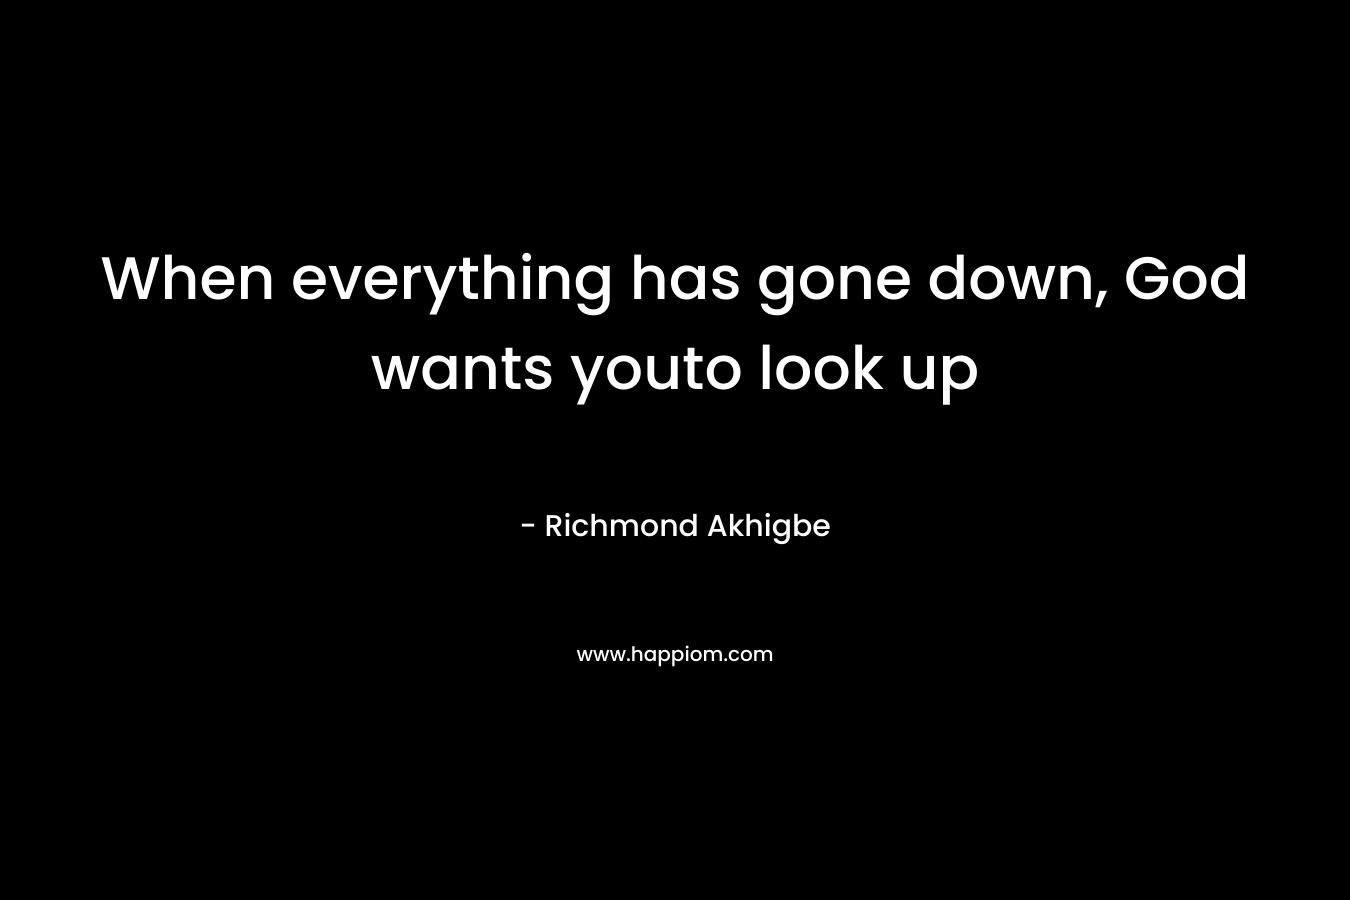 When everything has gone down, God wants youto look up – Richmond Akhigbe